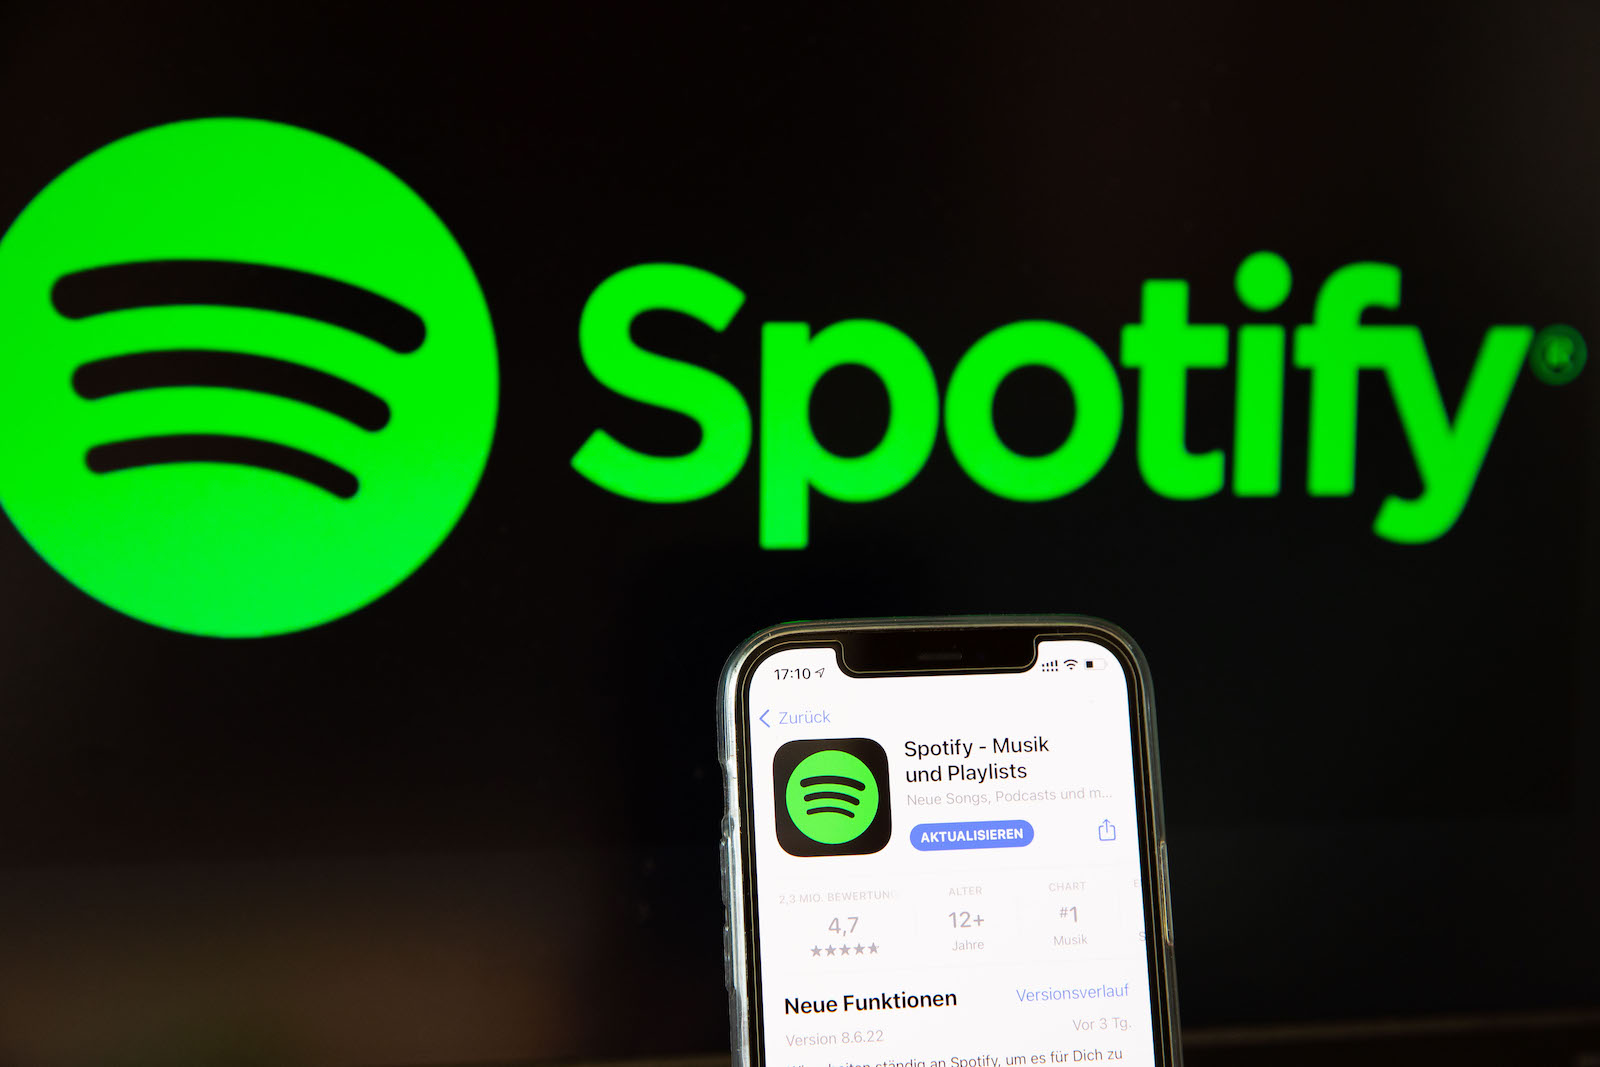  delete-spotify-account-How-to-Delete-Spotify-Account-on-iPhone 